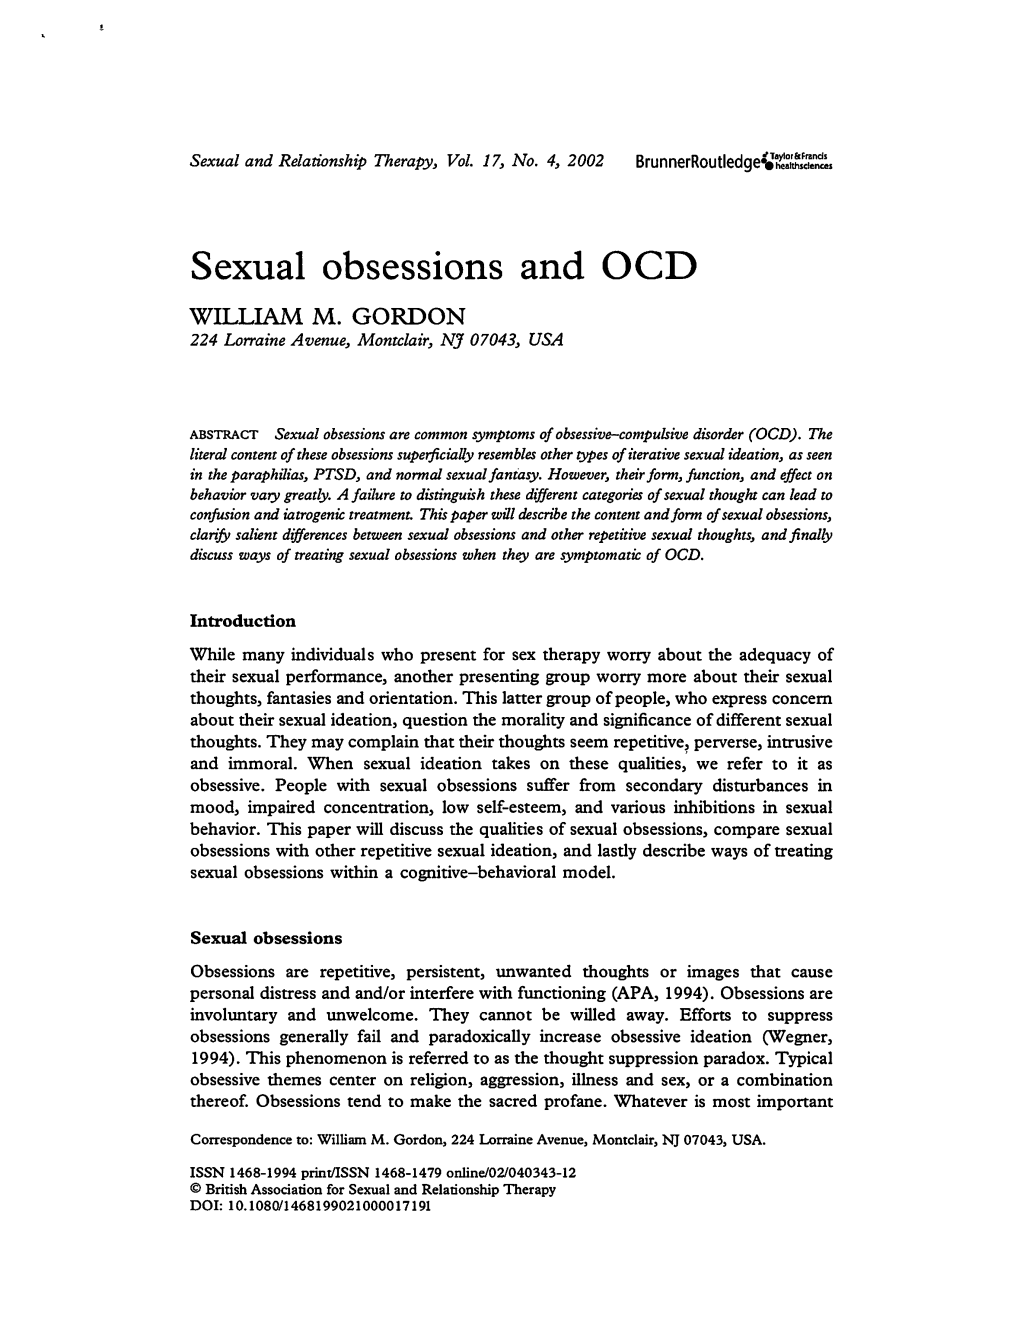 Sexual Obsessions and OCD